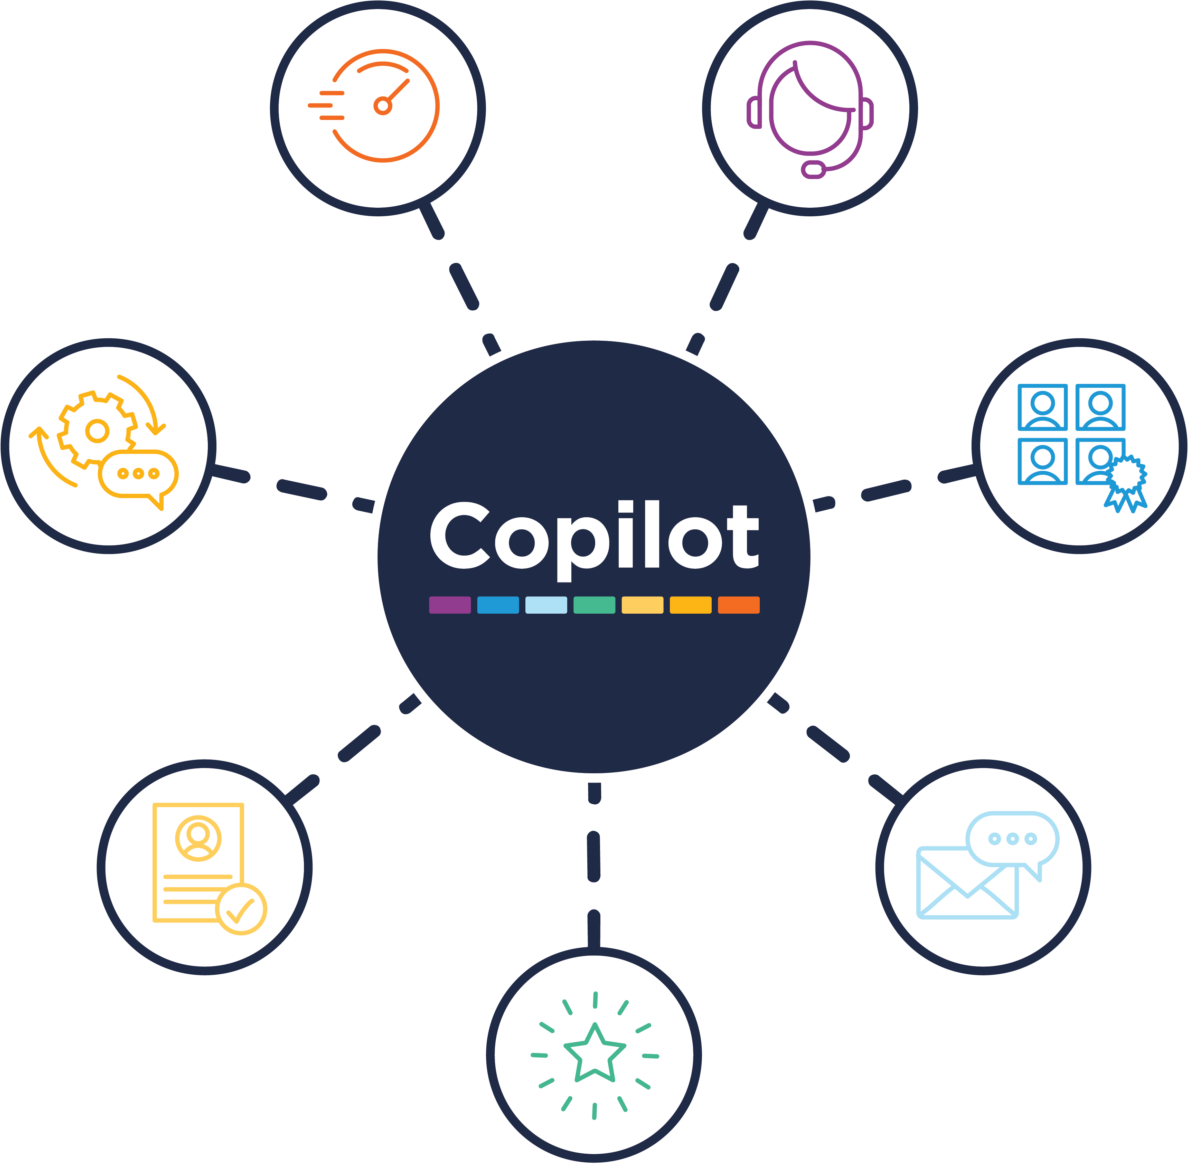 Copilot graphic with icons